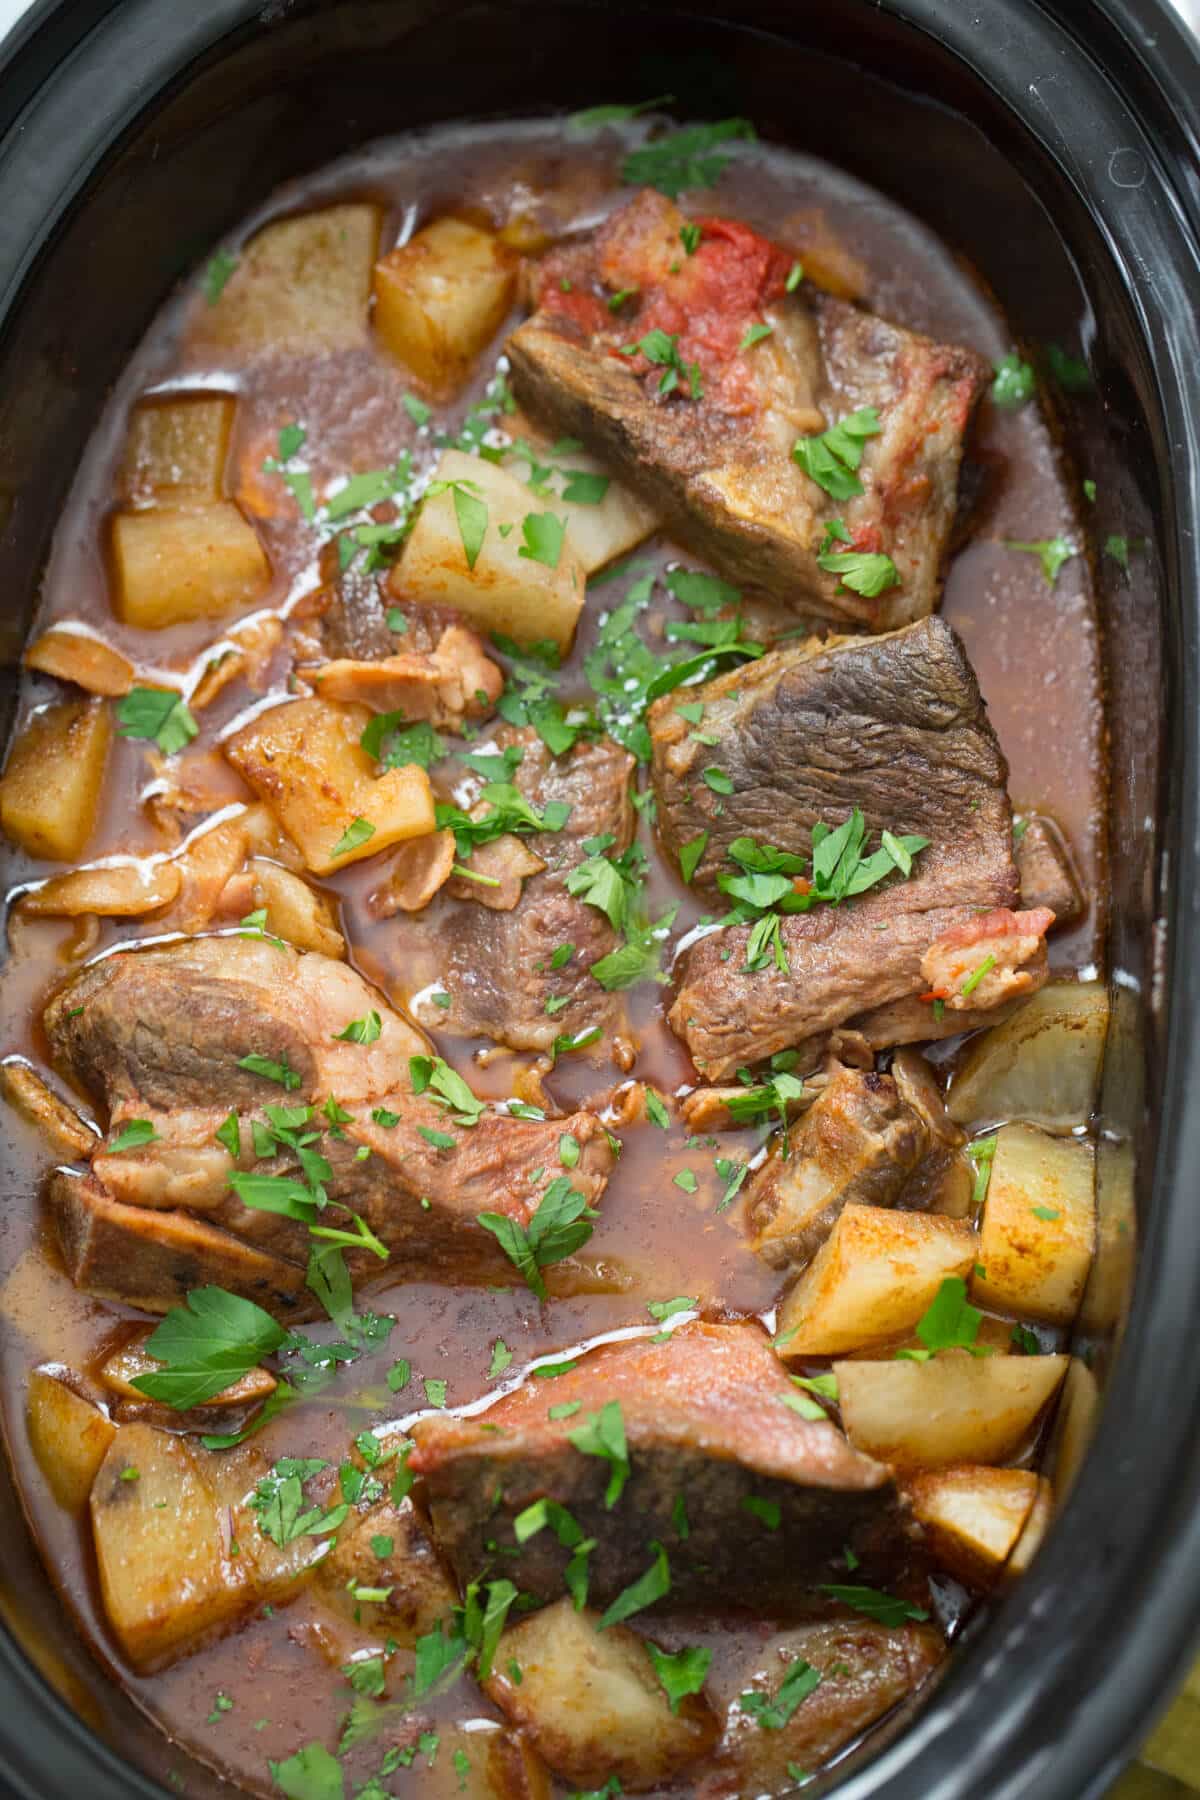 Slow cooker short ribs are resting in Guinness infused broth!  How can you say no?